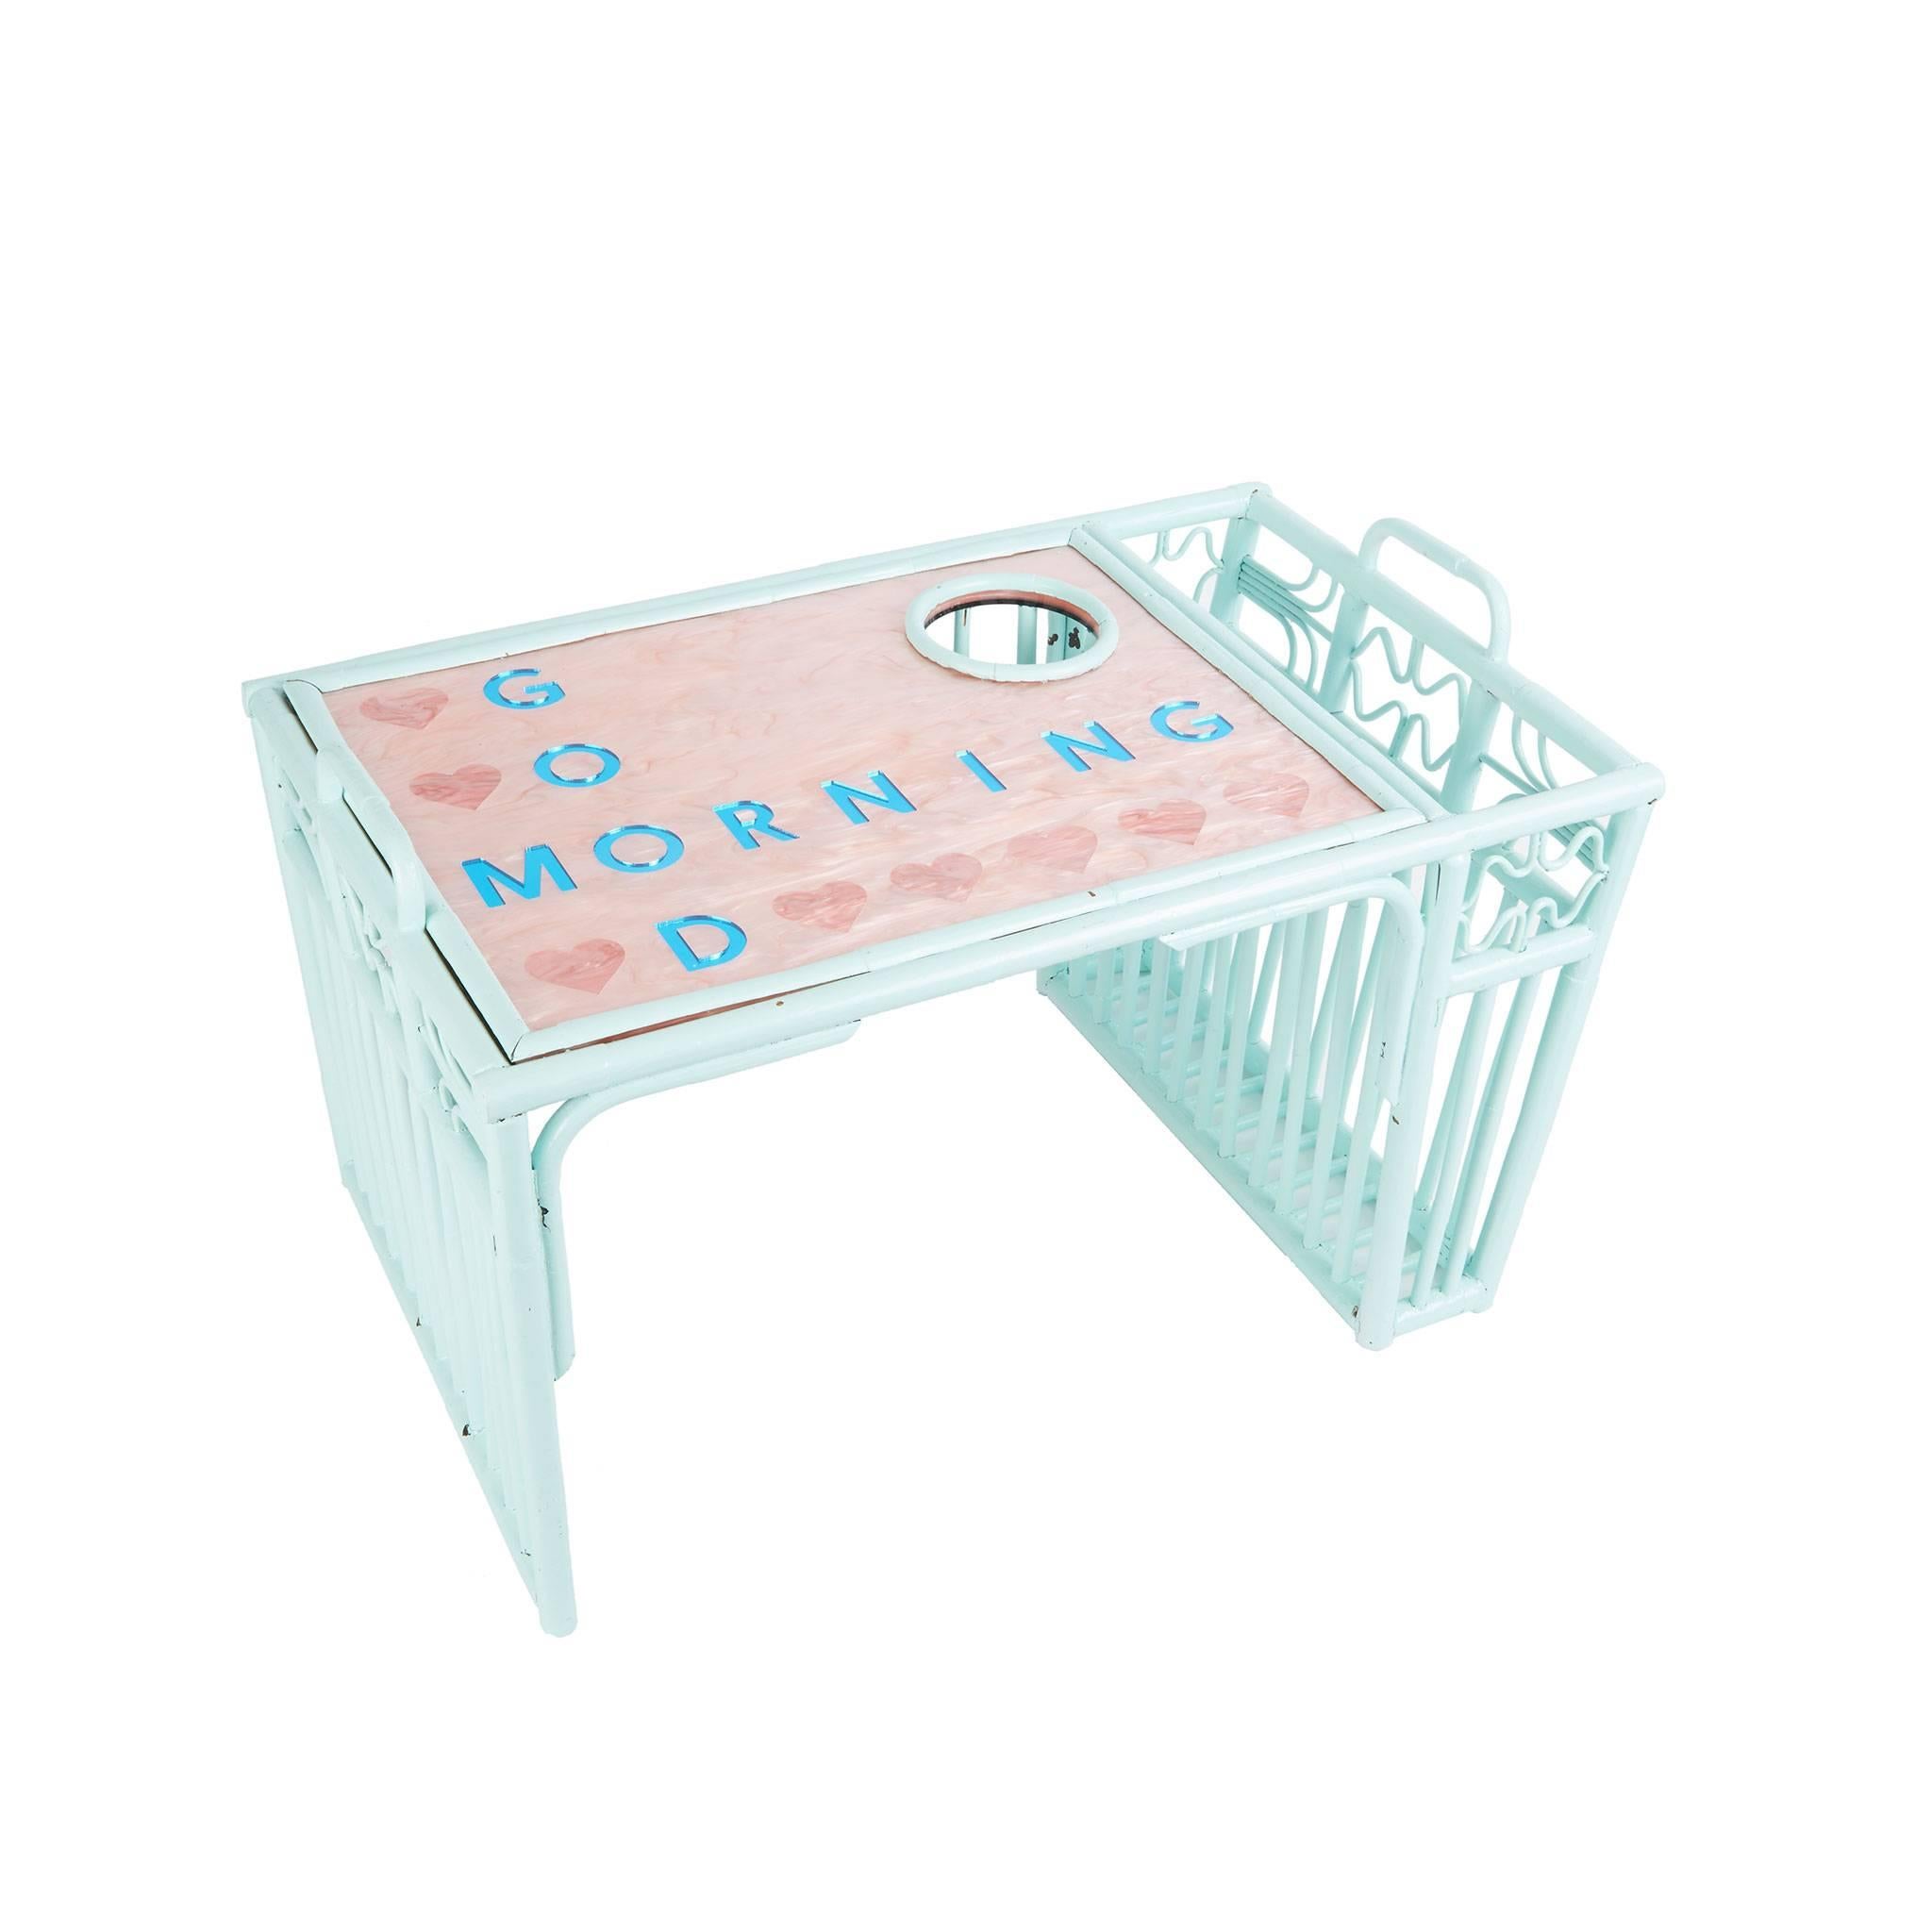 Refurbished Vintage Breakfast Tray painted in light blue with exclusive Edie Parker tray in rose quartz pearlescent, pink and blue mirror print text. 

100% hand poured acrylic base
Wood tray

Edie Parker products are handcrafted of the finest